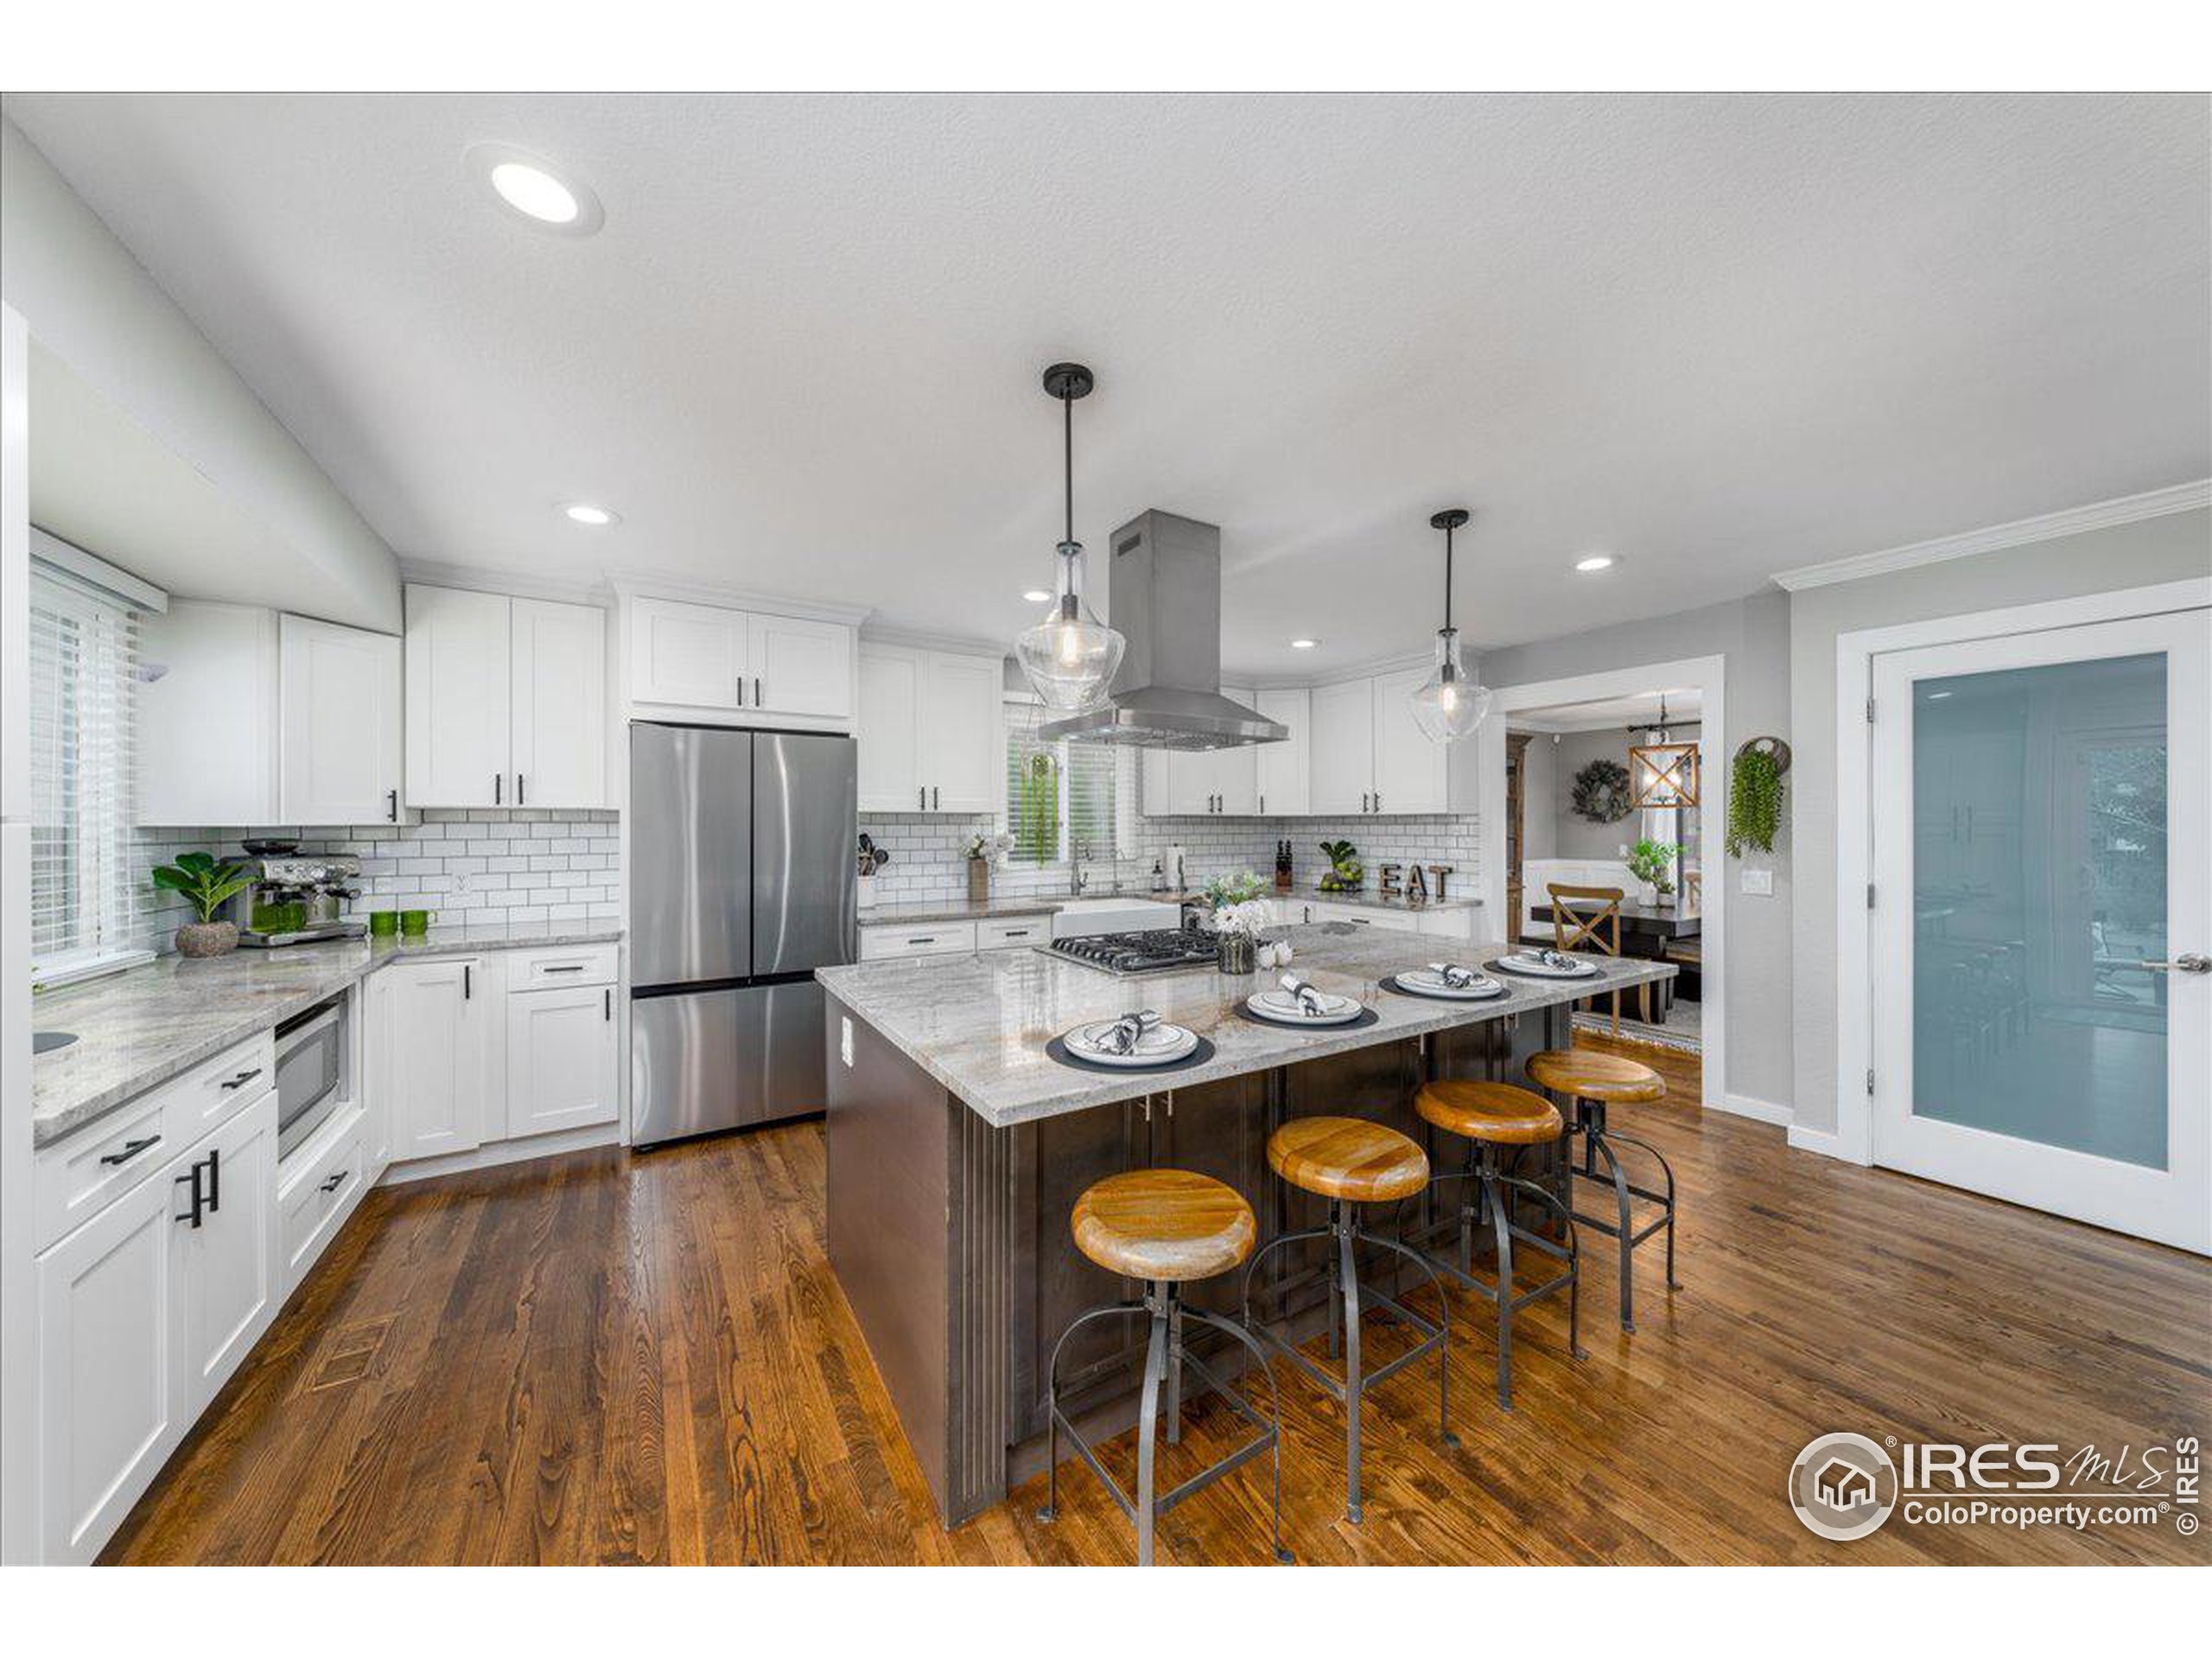 a kitchen with stainless steel appliances kitchen island granite countertop a dining table and chairs